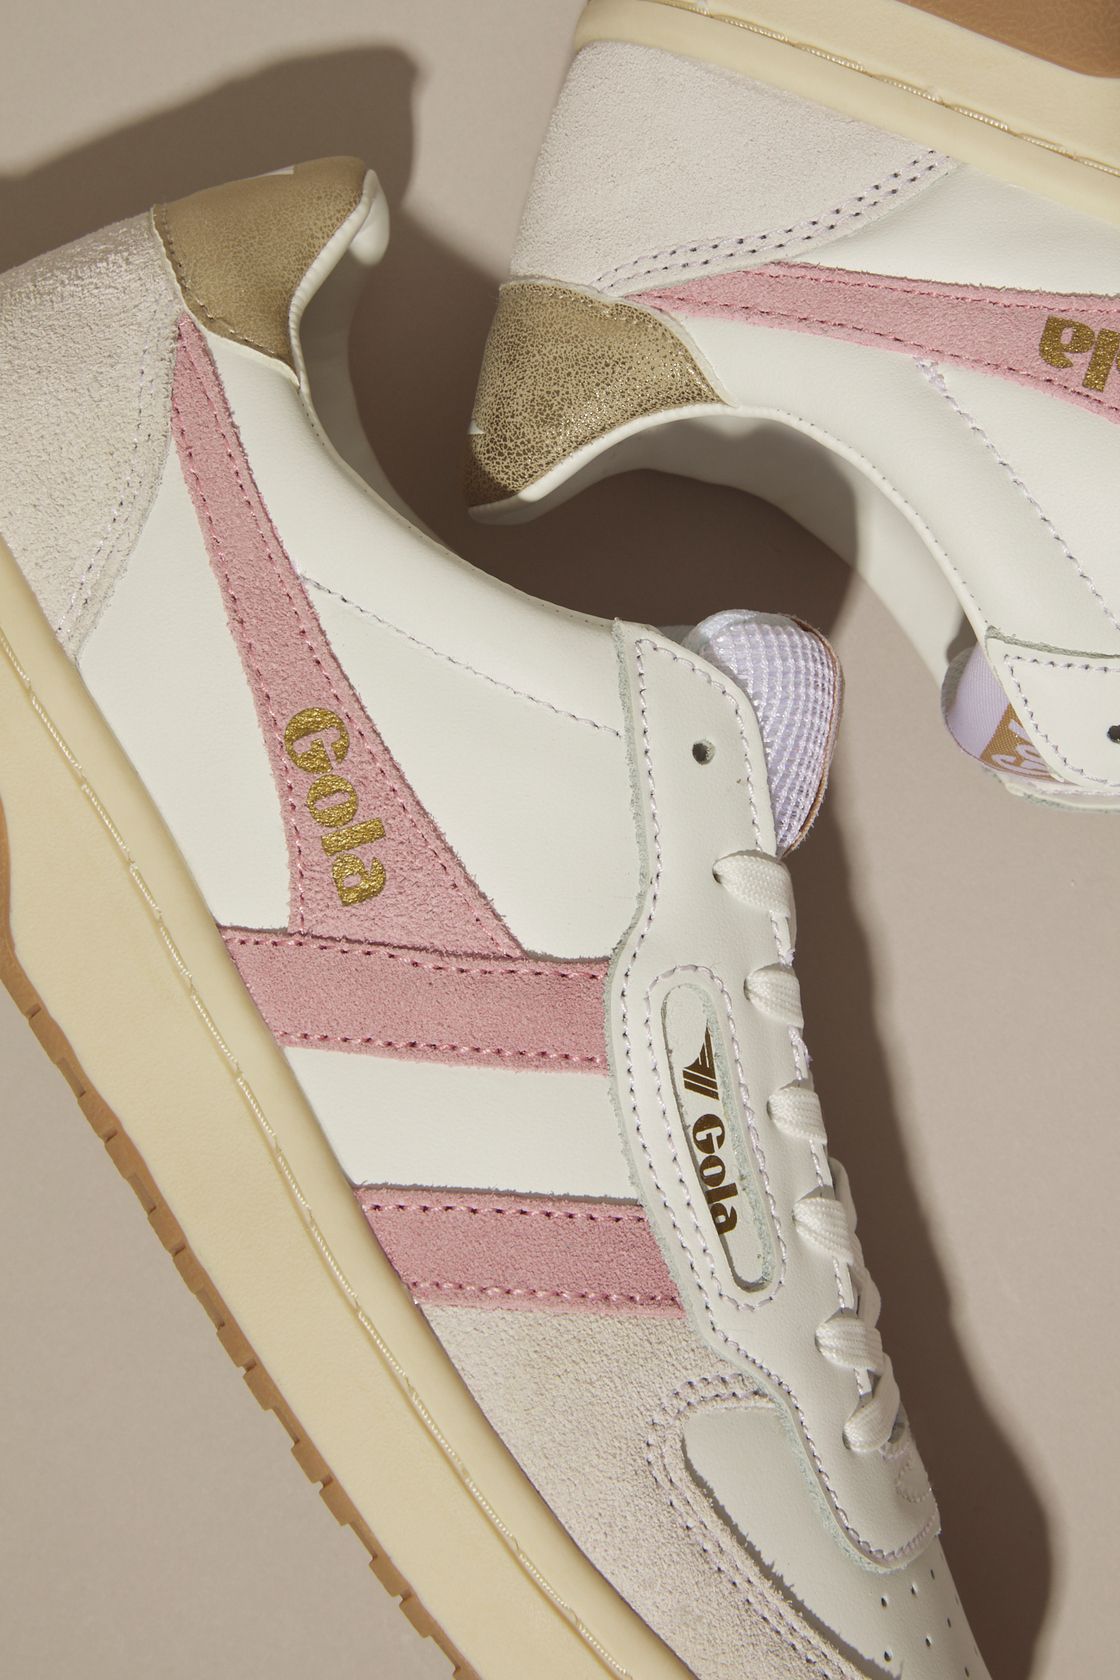 Gola Hawk Sneakers in White & Pink | Altar'd State | Altar'd State